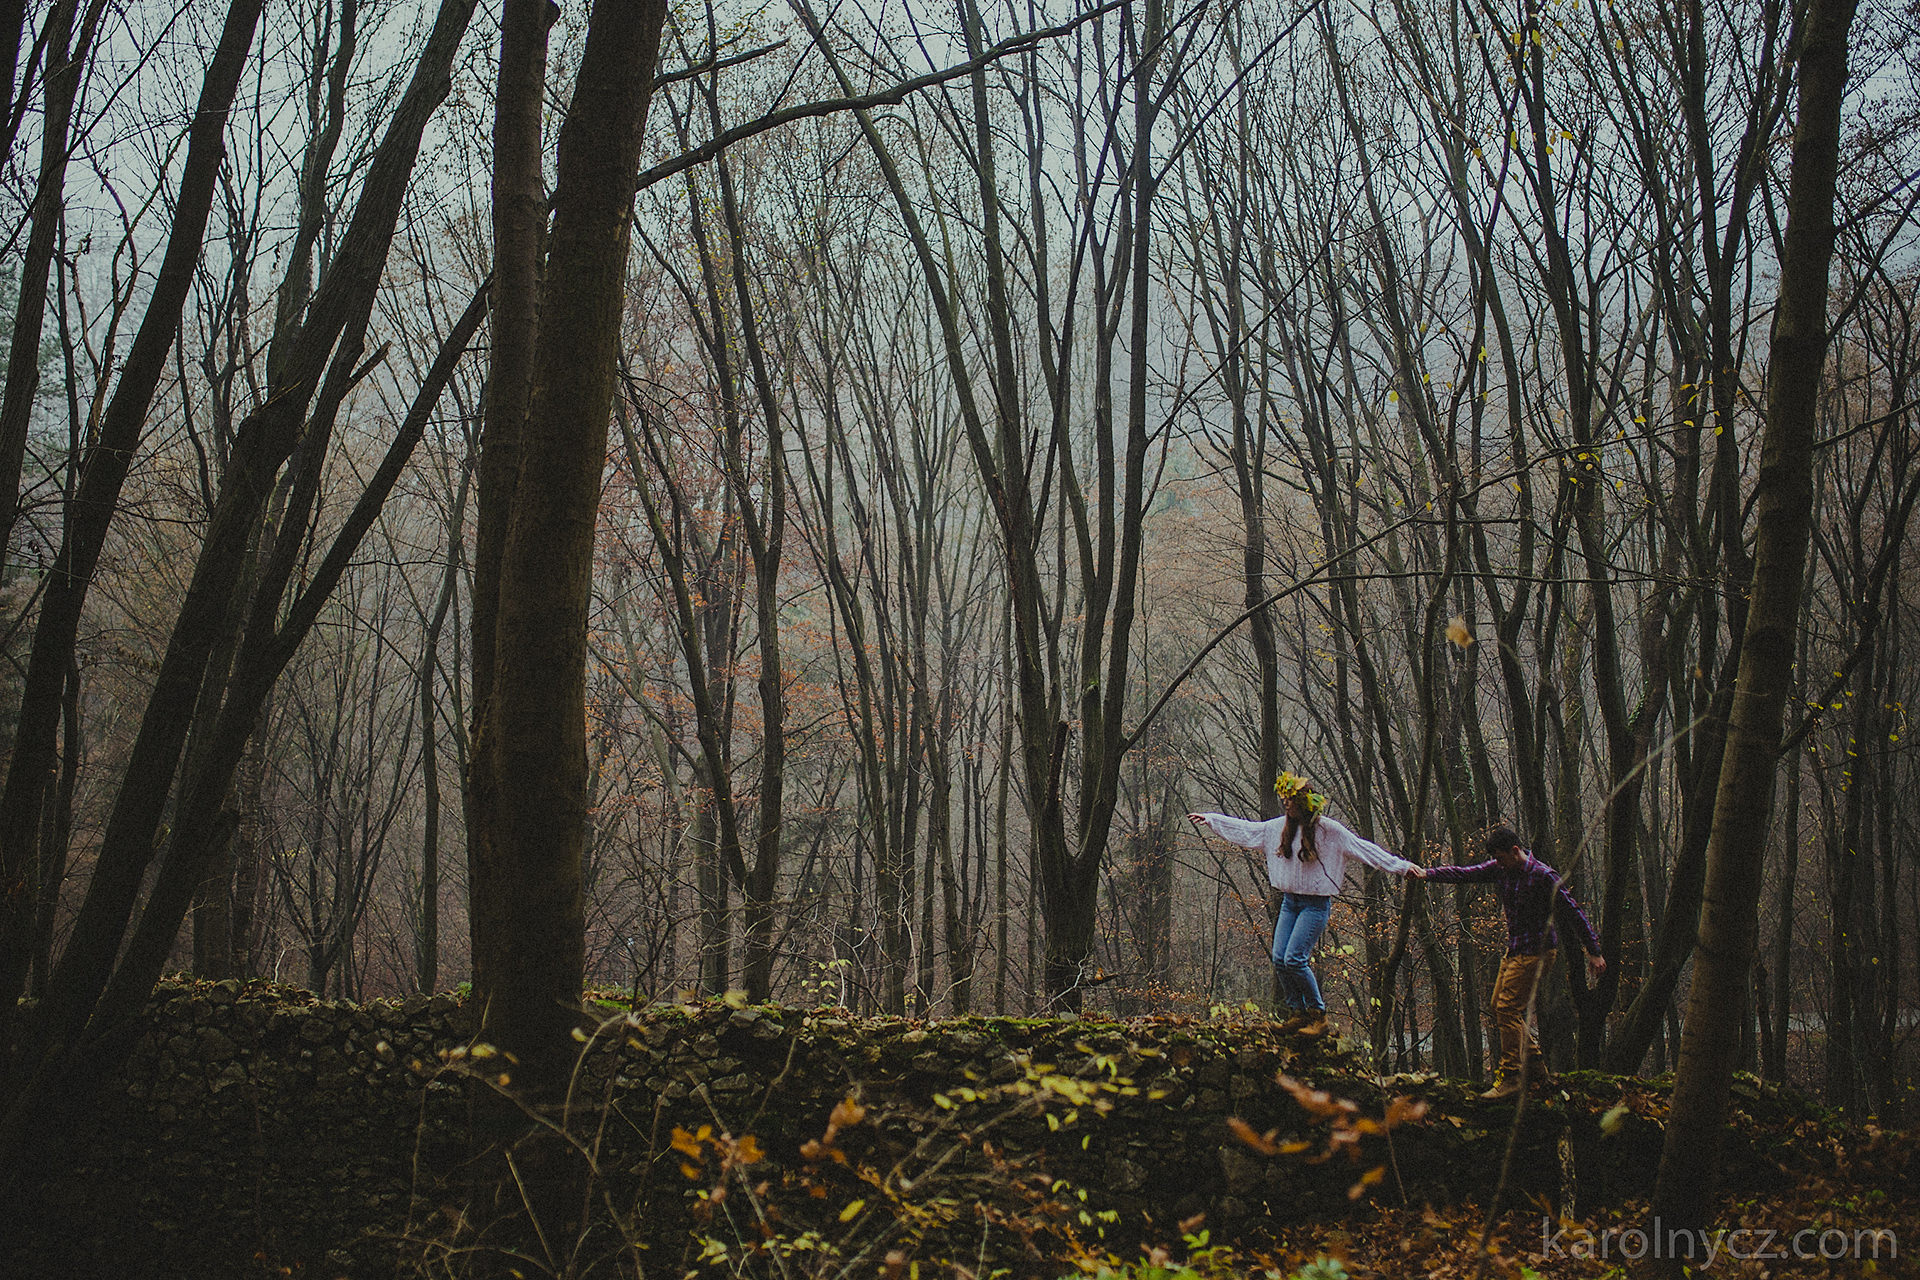 the beautiful forest scenery of the engagement session